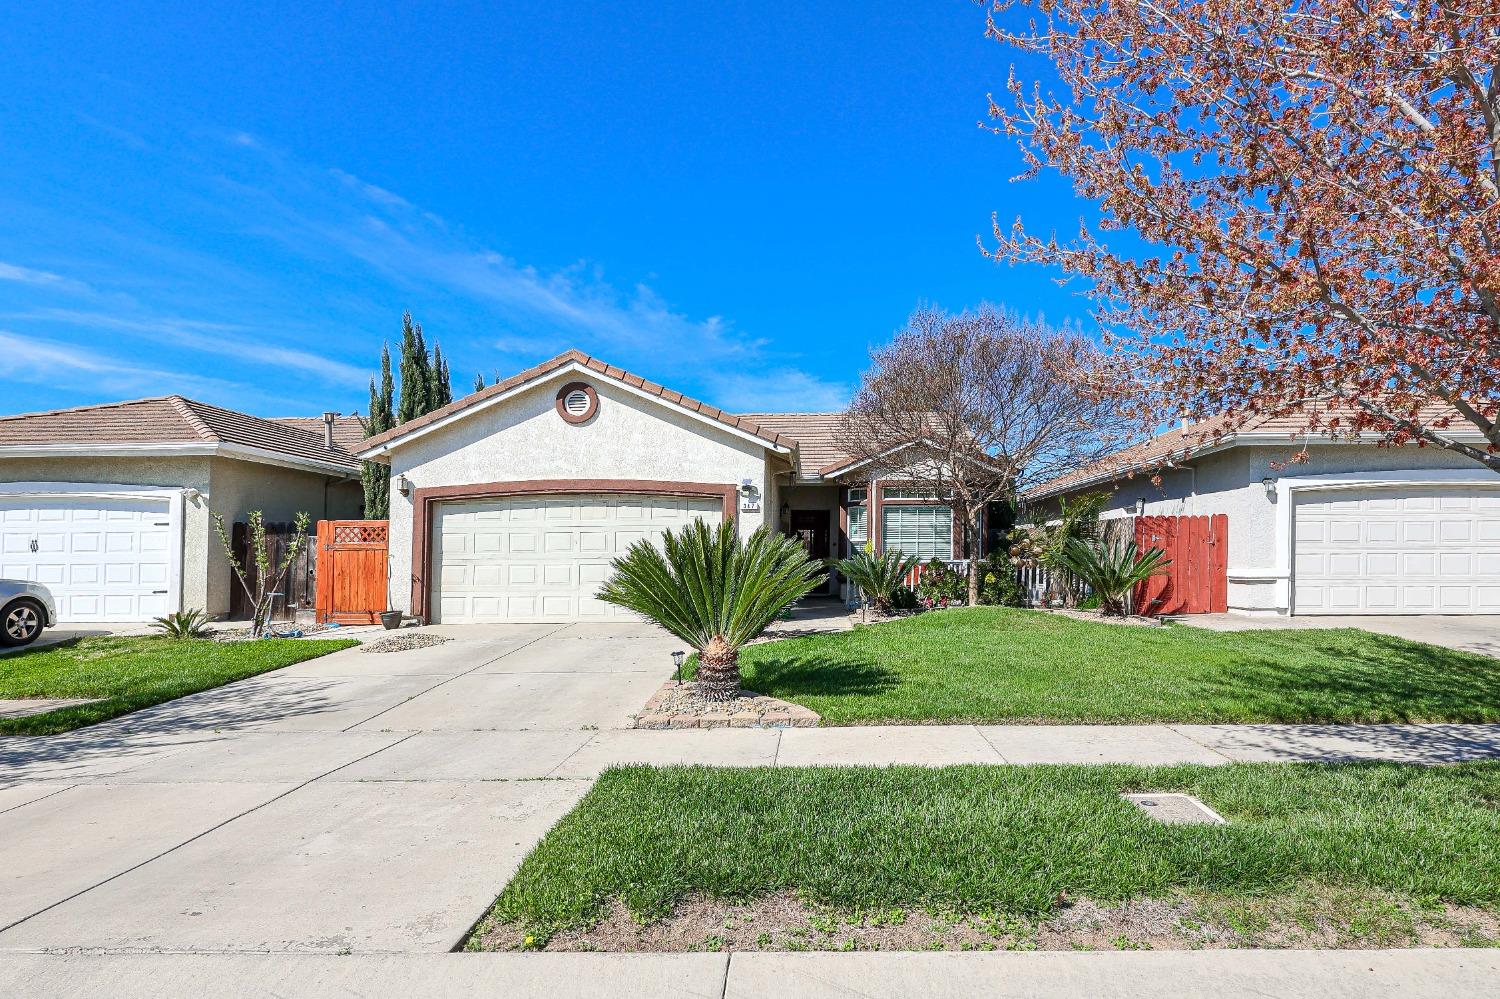 Photo of 347 Halley Ave in Merced, CA